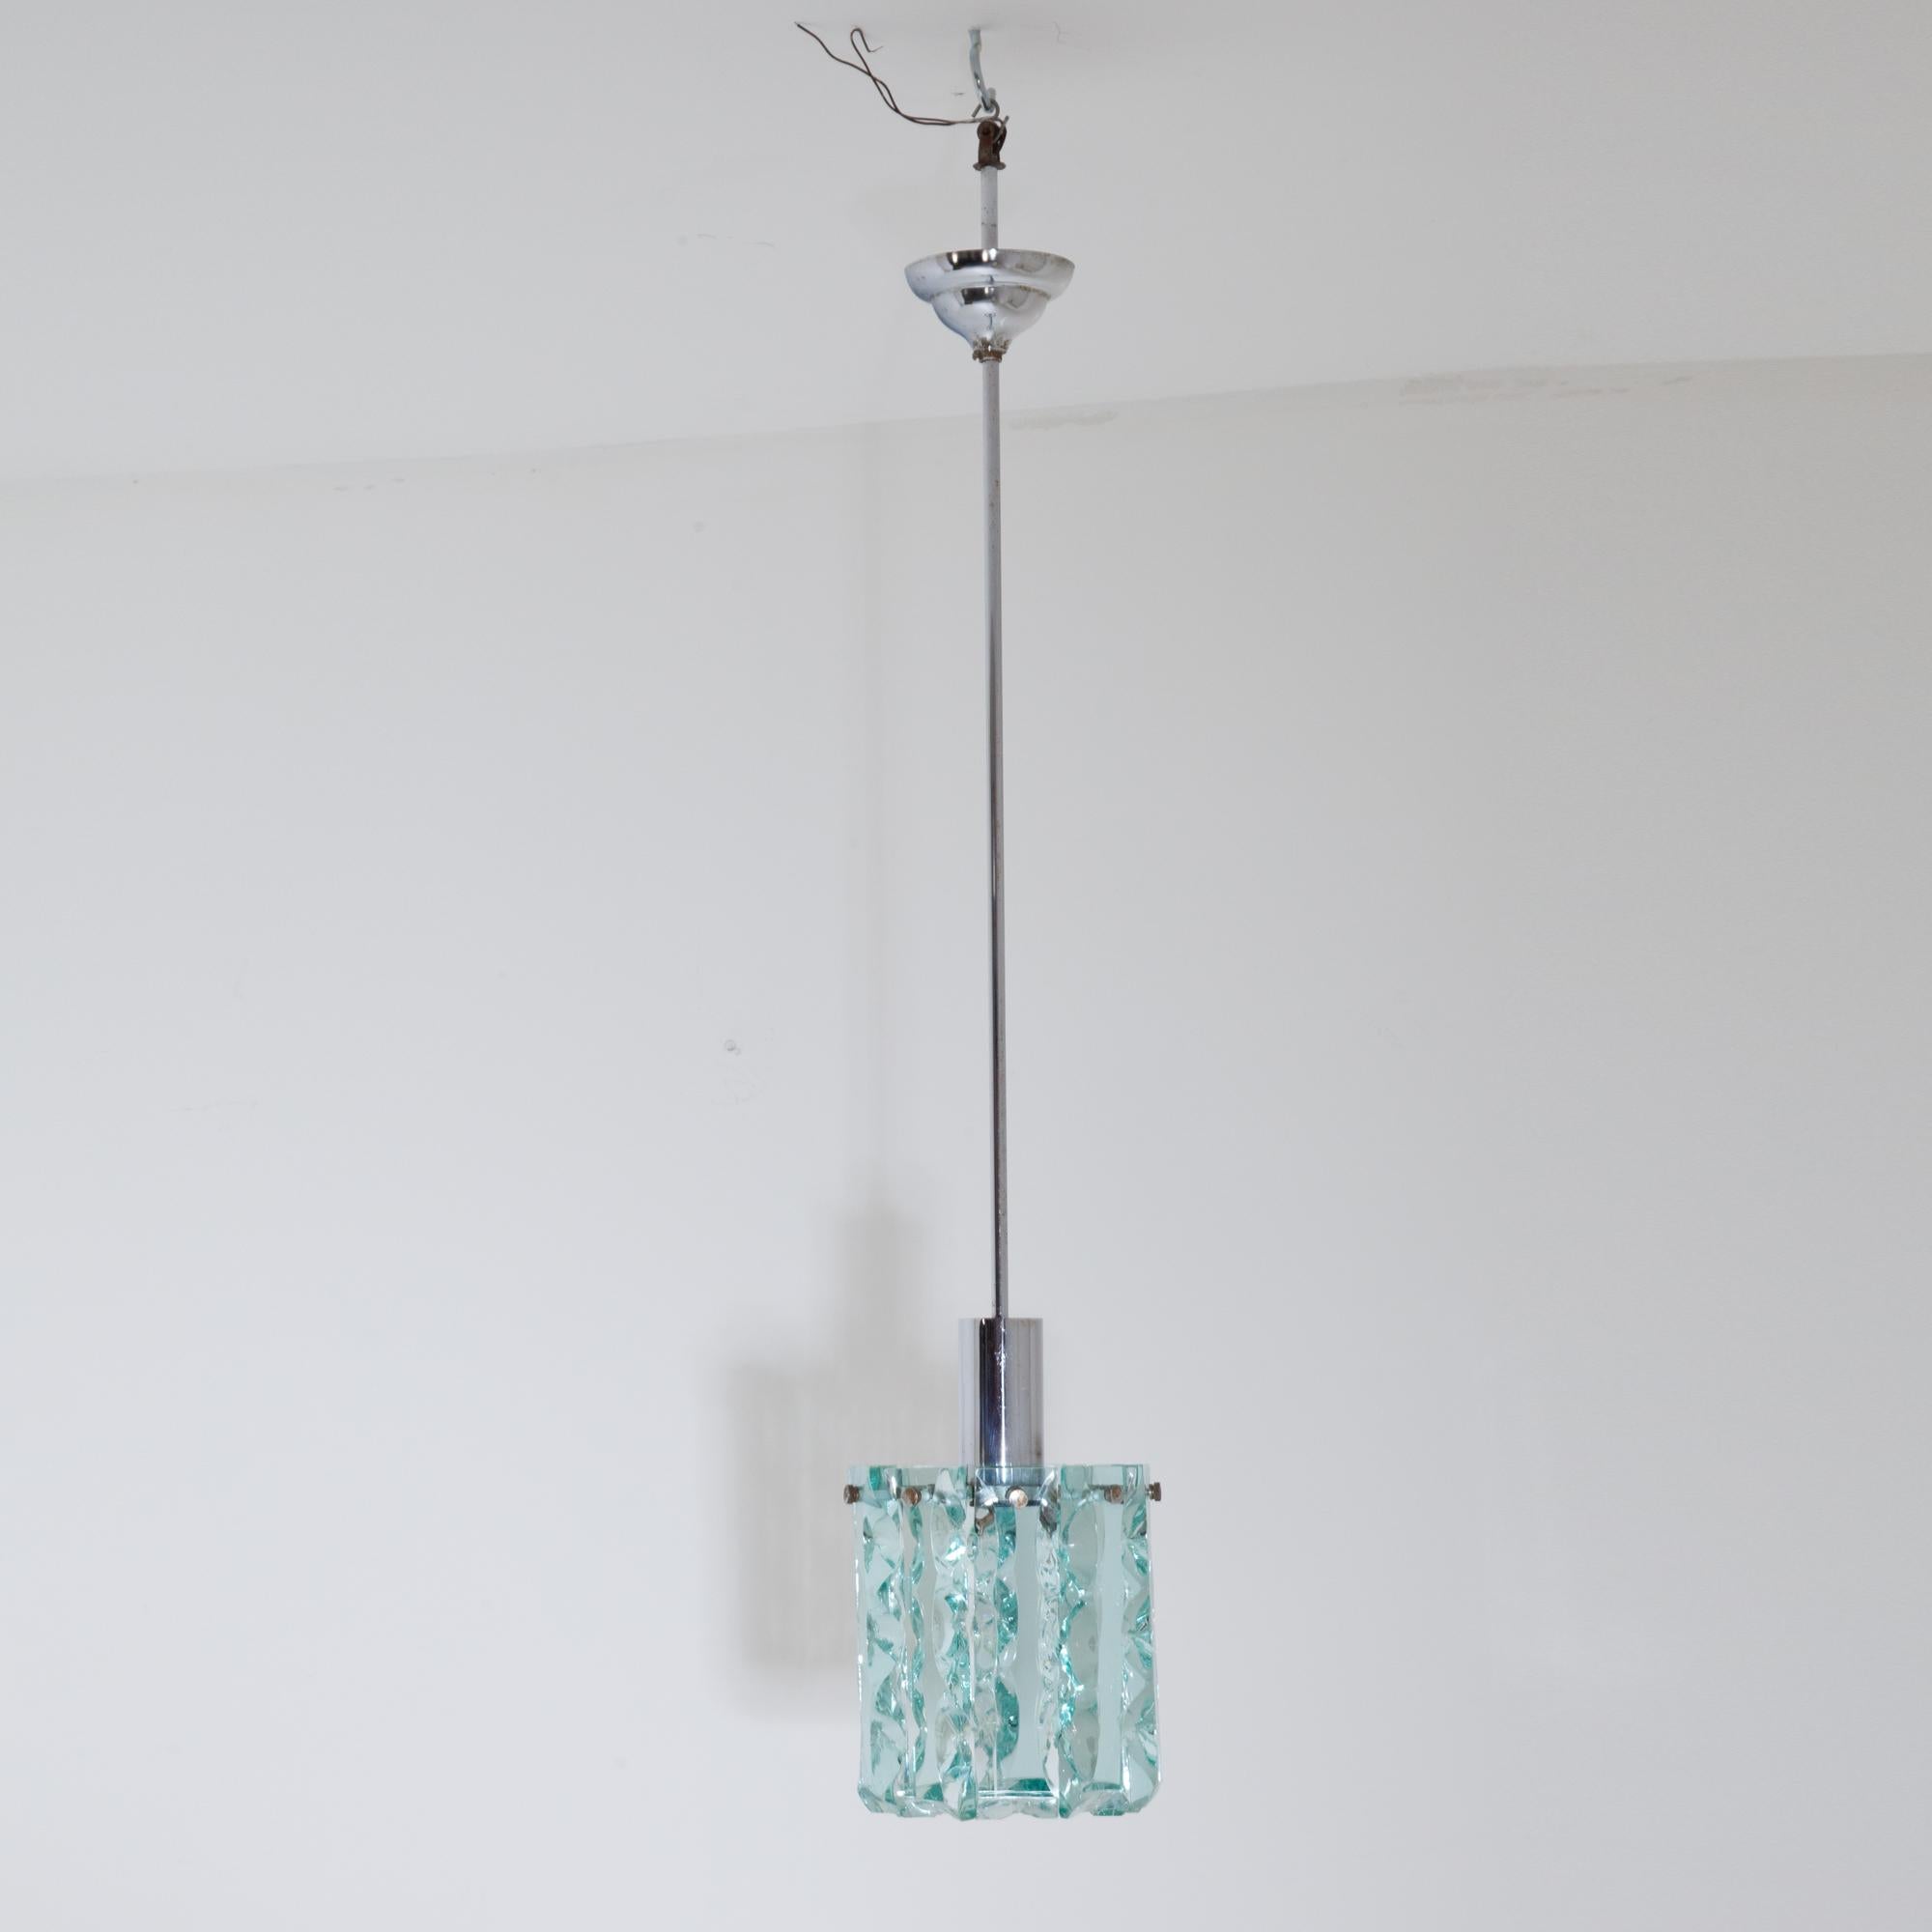 Pair of pendant lights, each with a socket surrounded by narrow frosted glass rods.